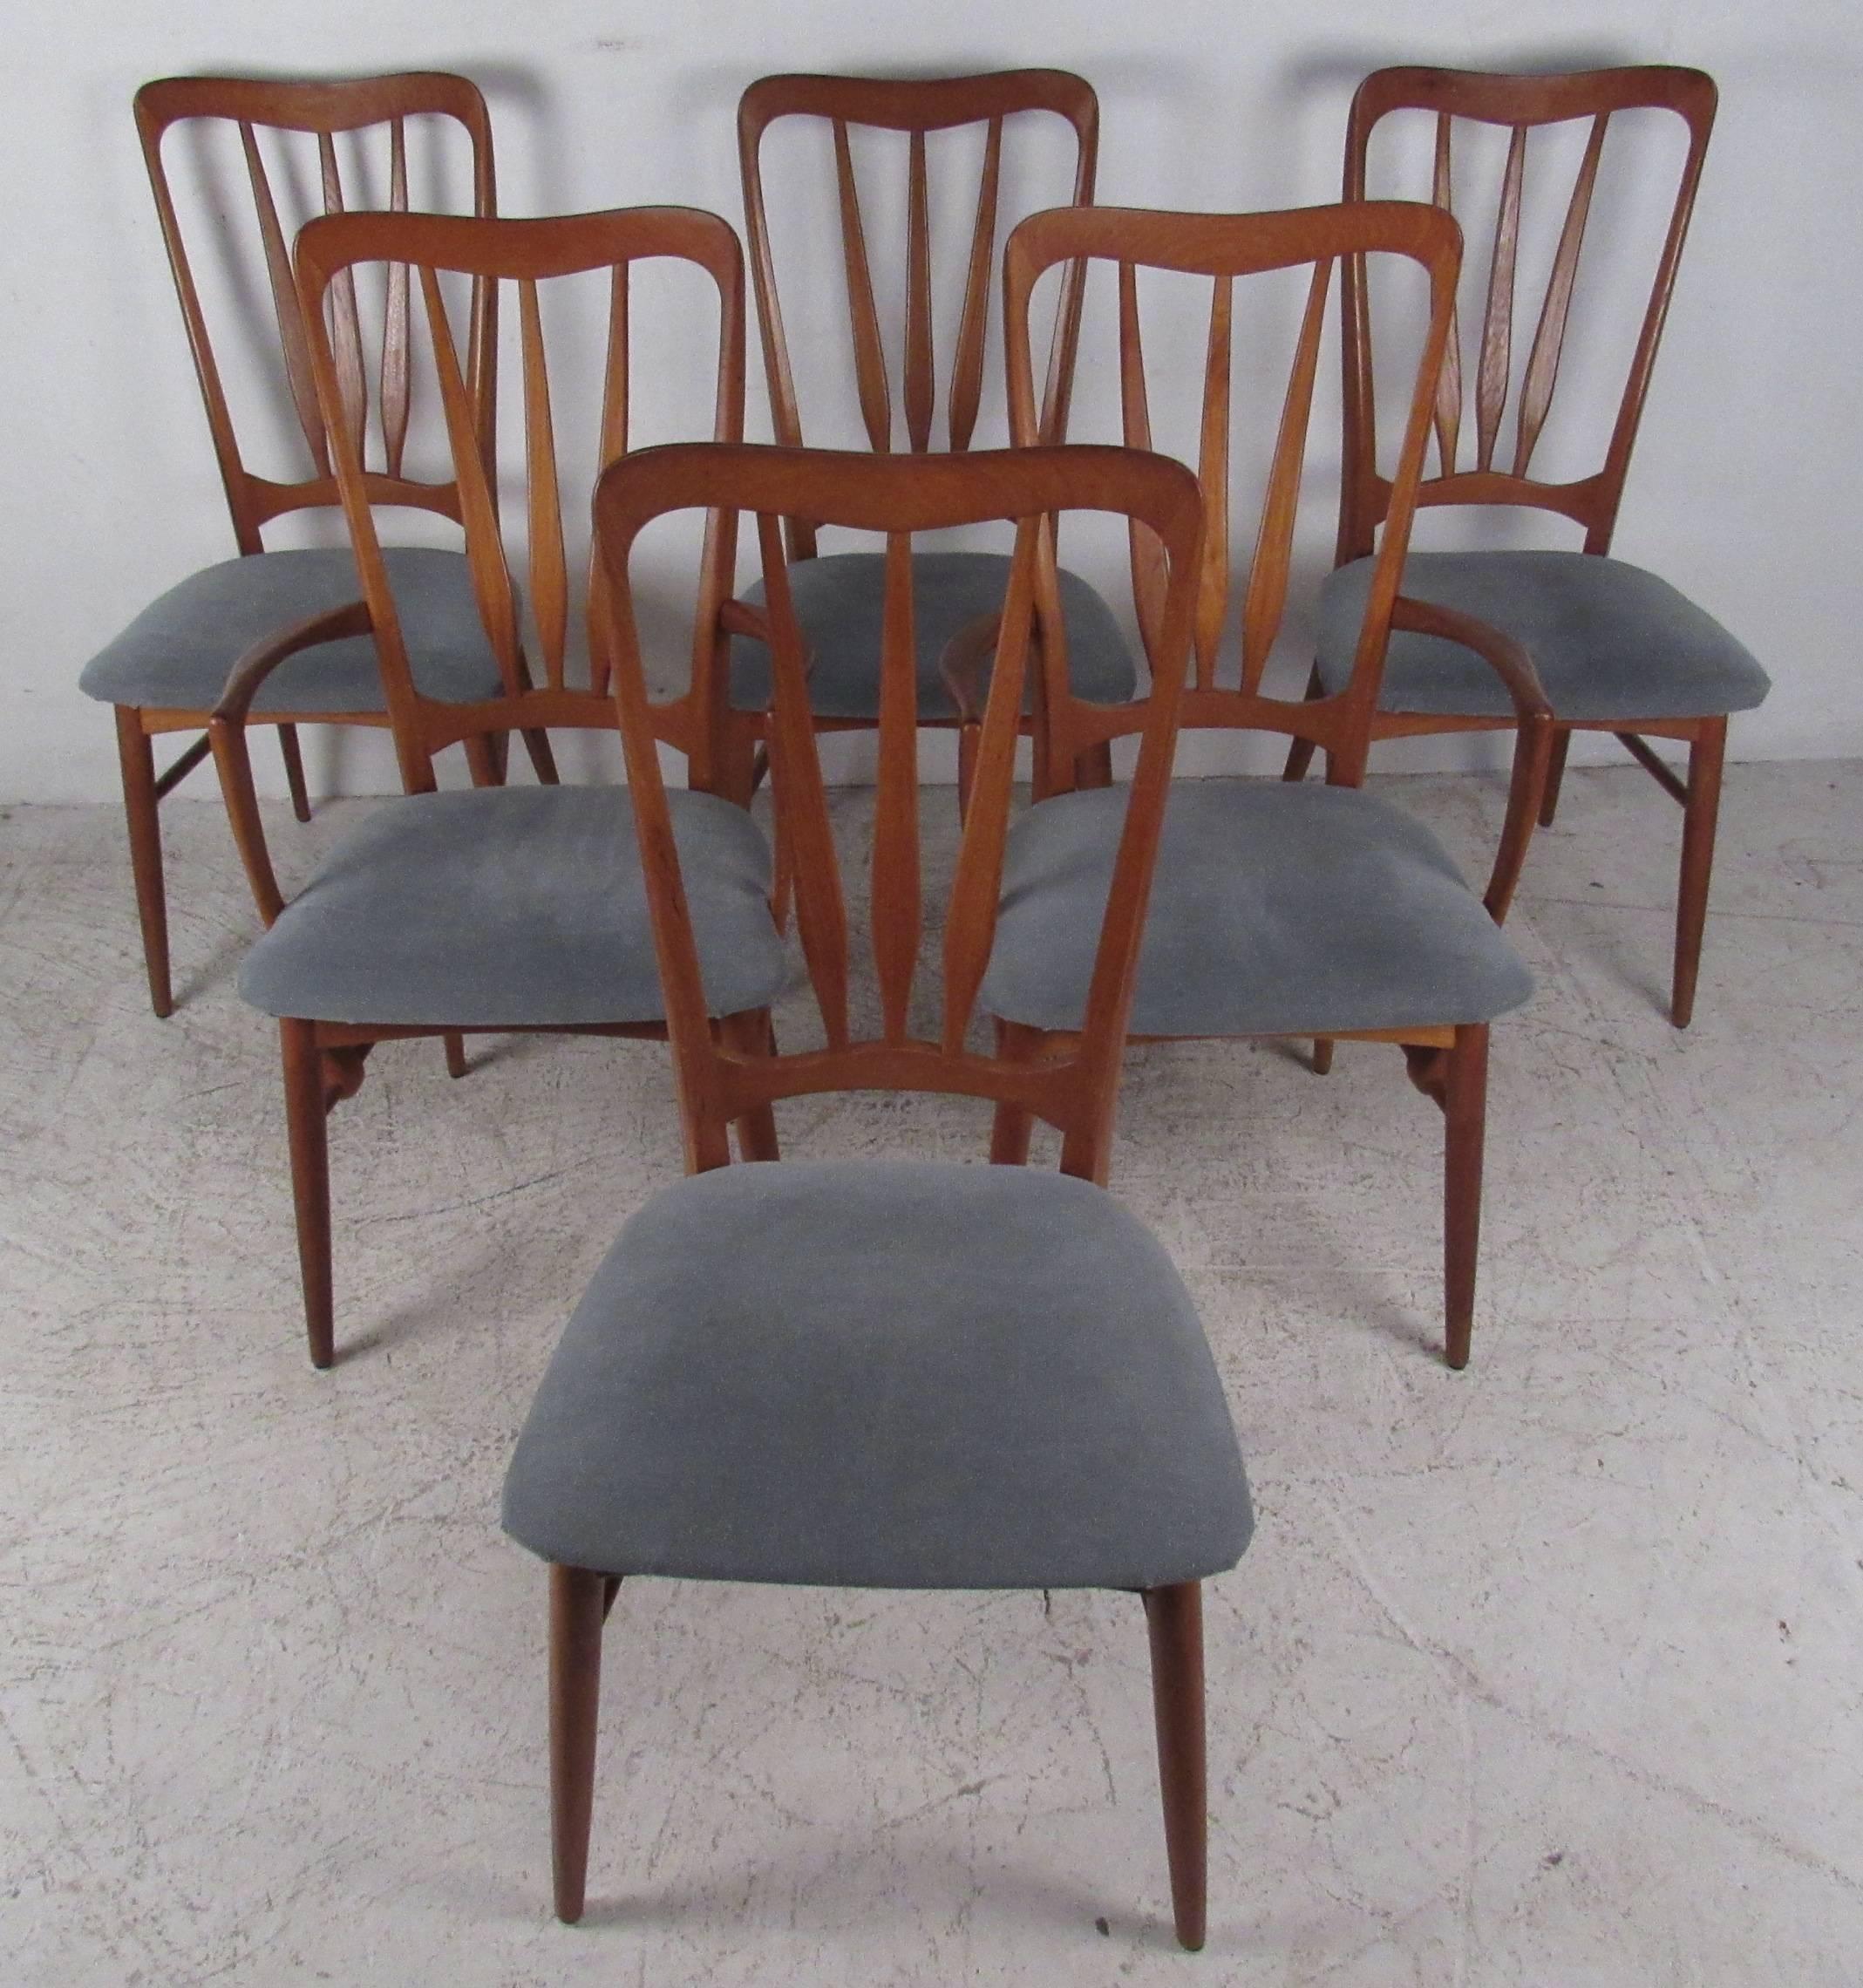 Set of six Danish modern dining chairs attributed to Folke Ohlsson make an impressive sculptural addition to dining room or kitchen seating. Exquisite Scandinavian Modern design includes shapely seat backs and comfortable proportions. Please confirm